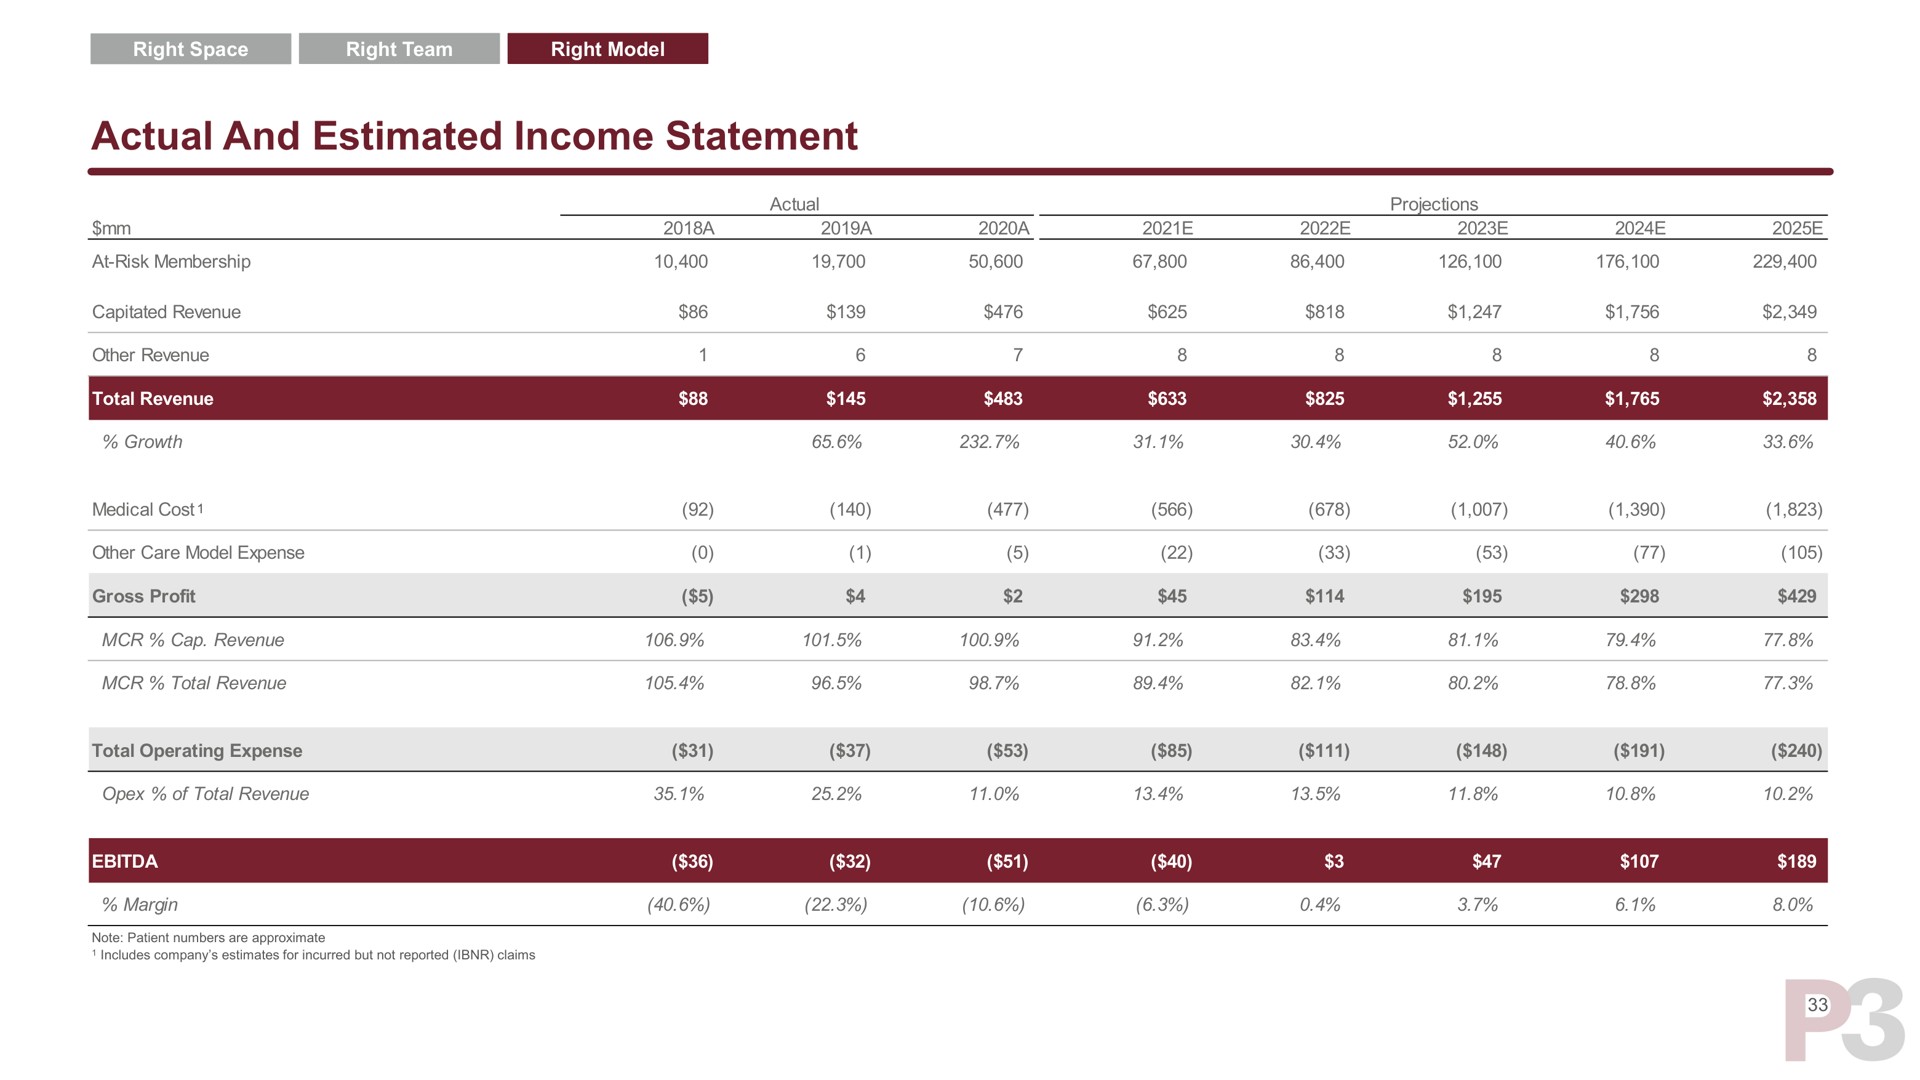 actual and estimated income statement | P3 Health Partners